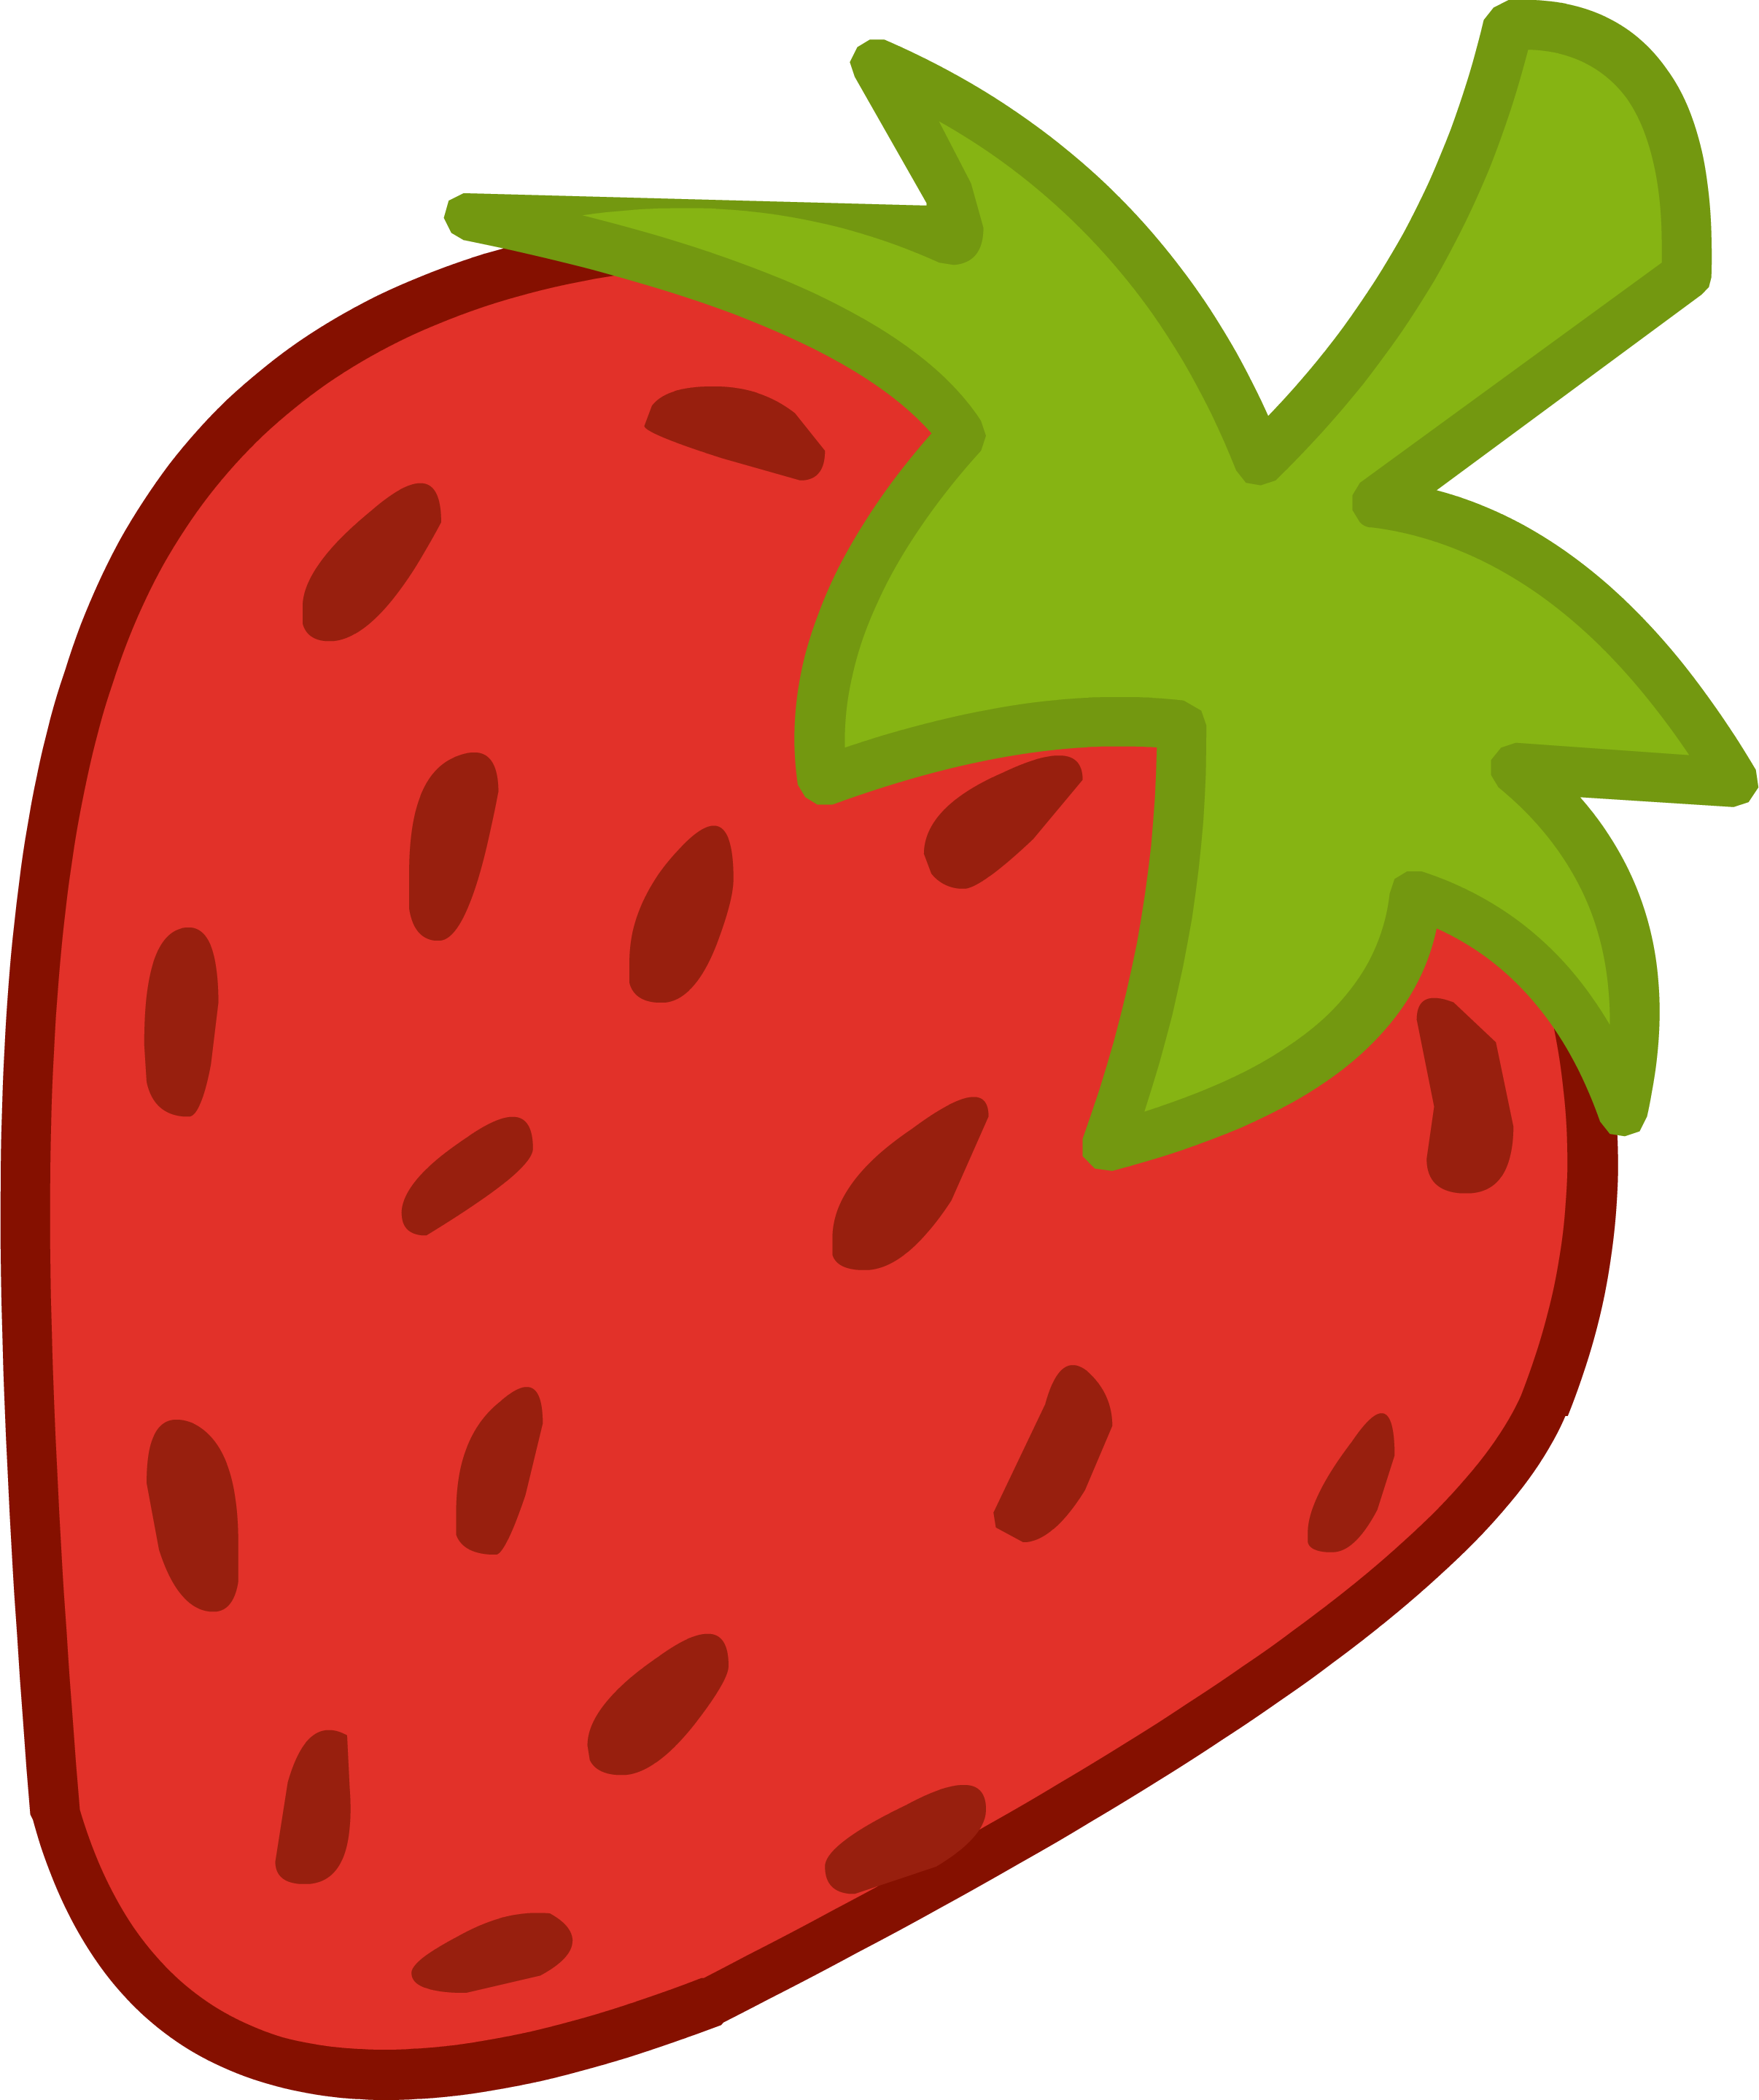 Strawberry clipart strawberry fruit clip art downloadclipart org 2.